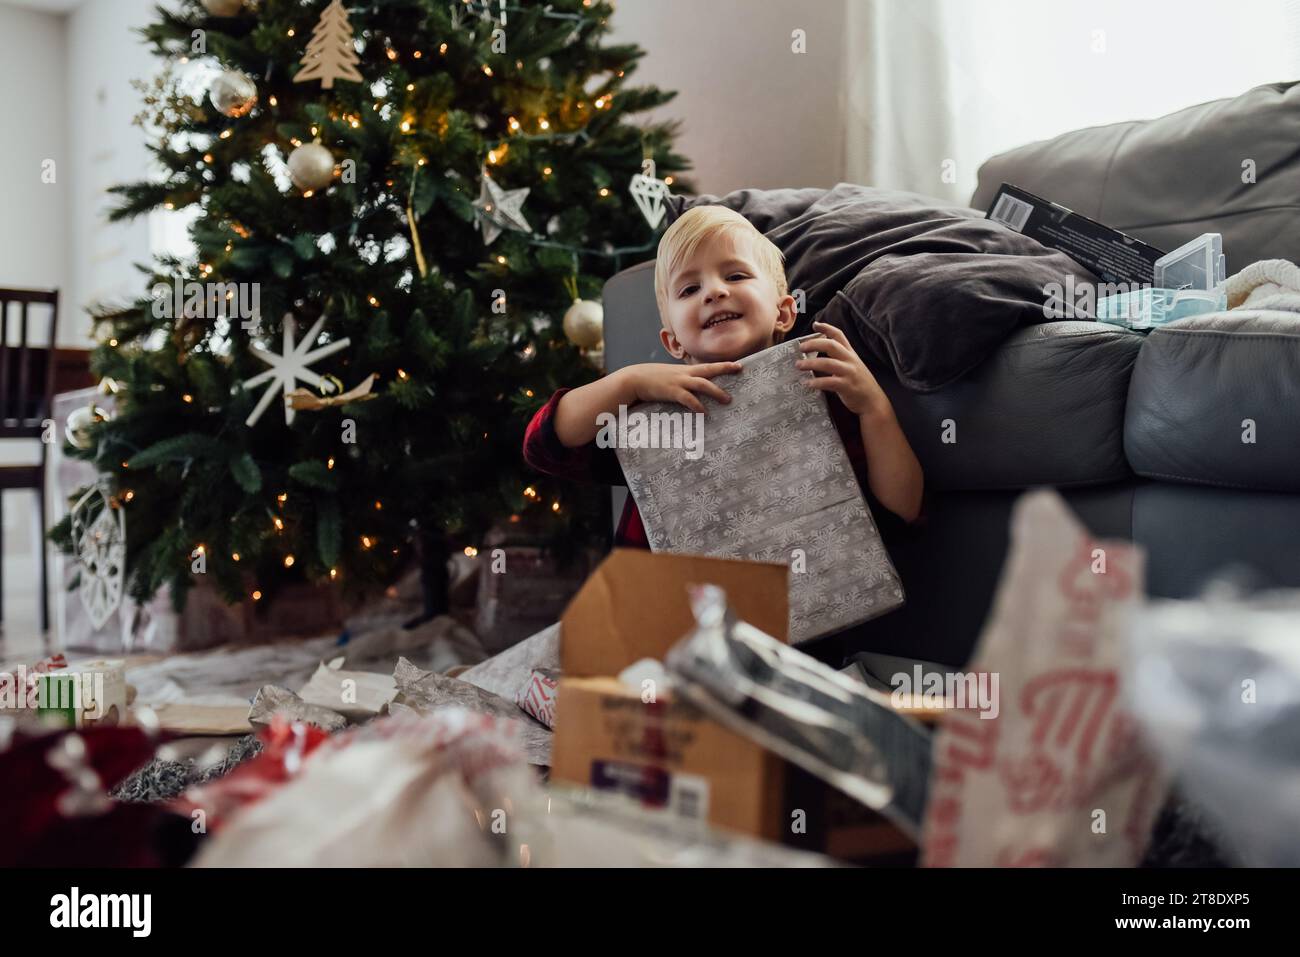 Small boy holds up present and smiles in front of christmas tree Stock Photo